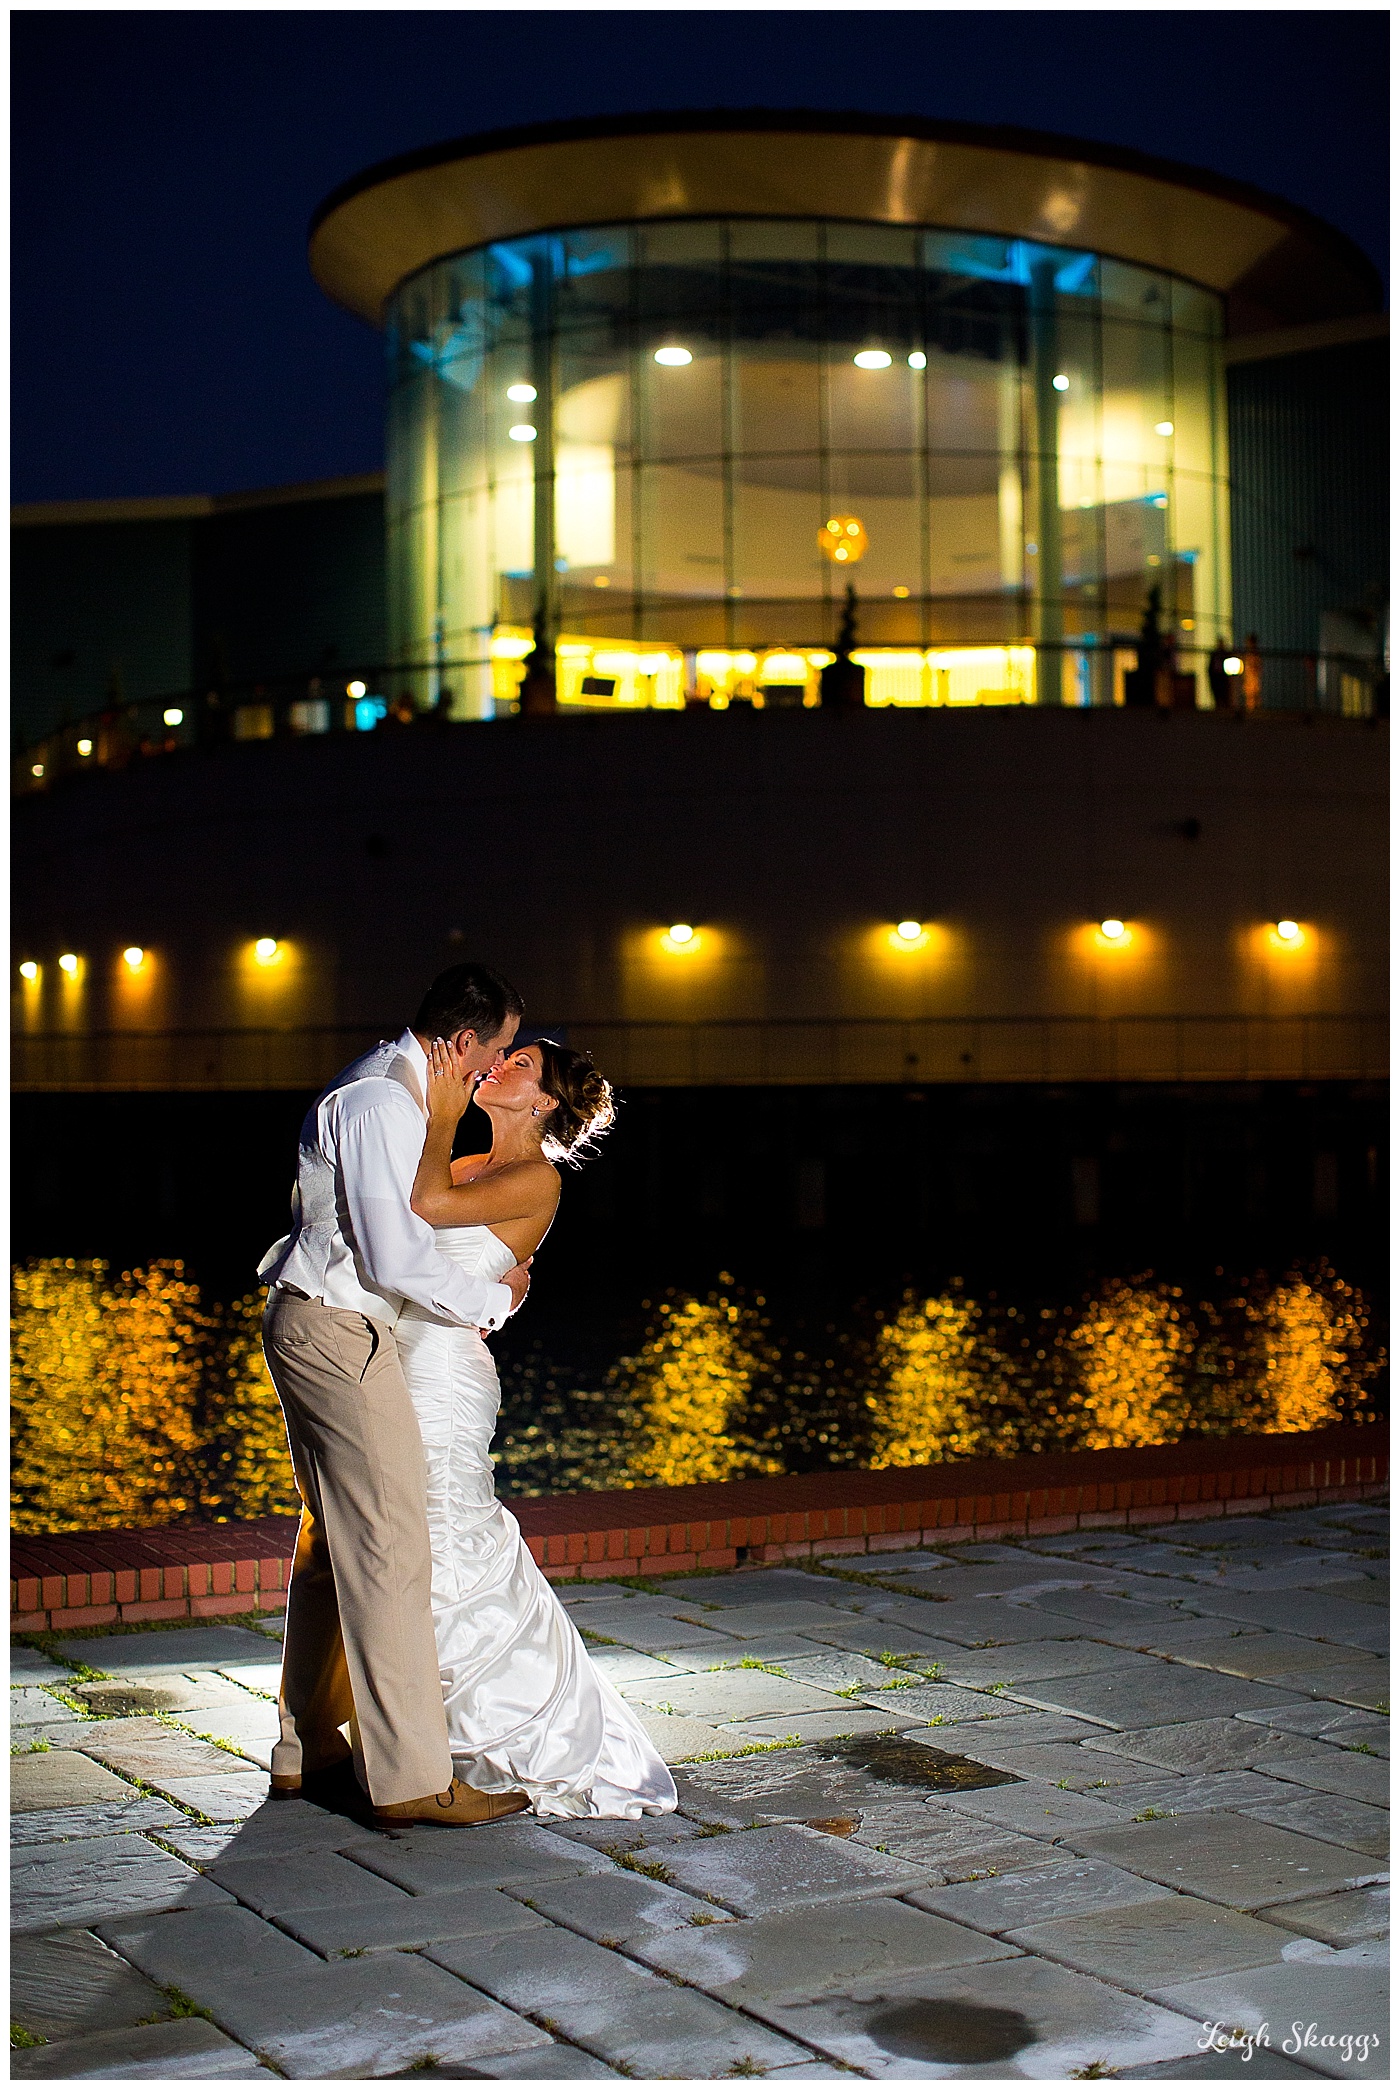 Tracey & Richard are Married!!  Their Half Moone Cruise and Celebration Center Sneak Peek!